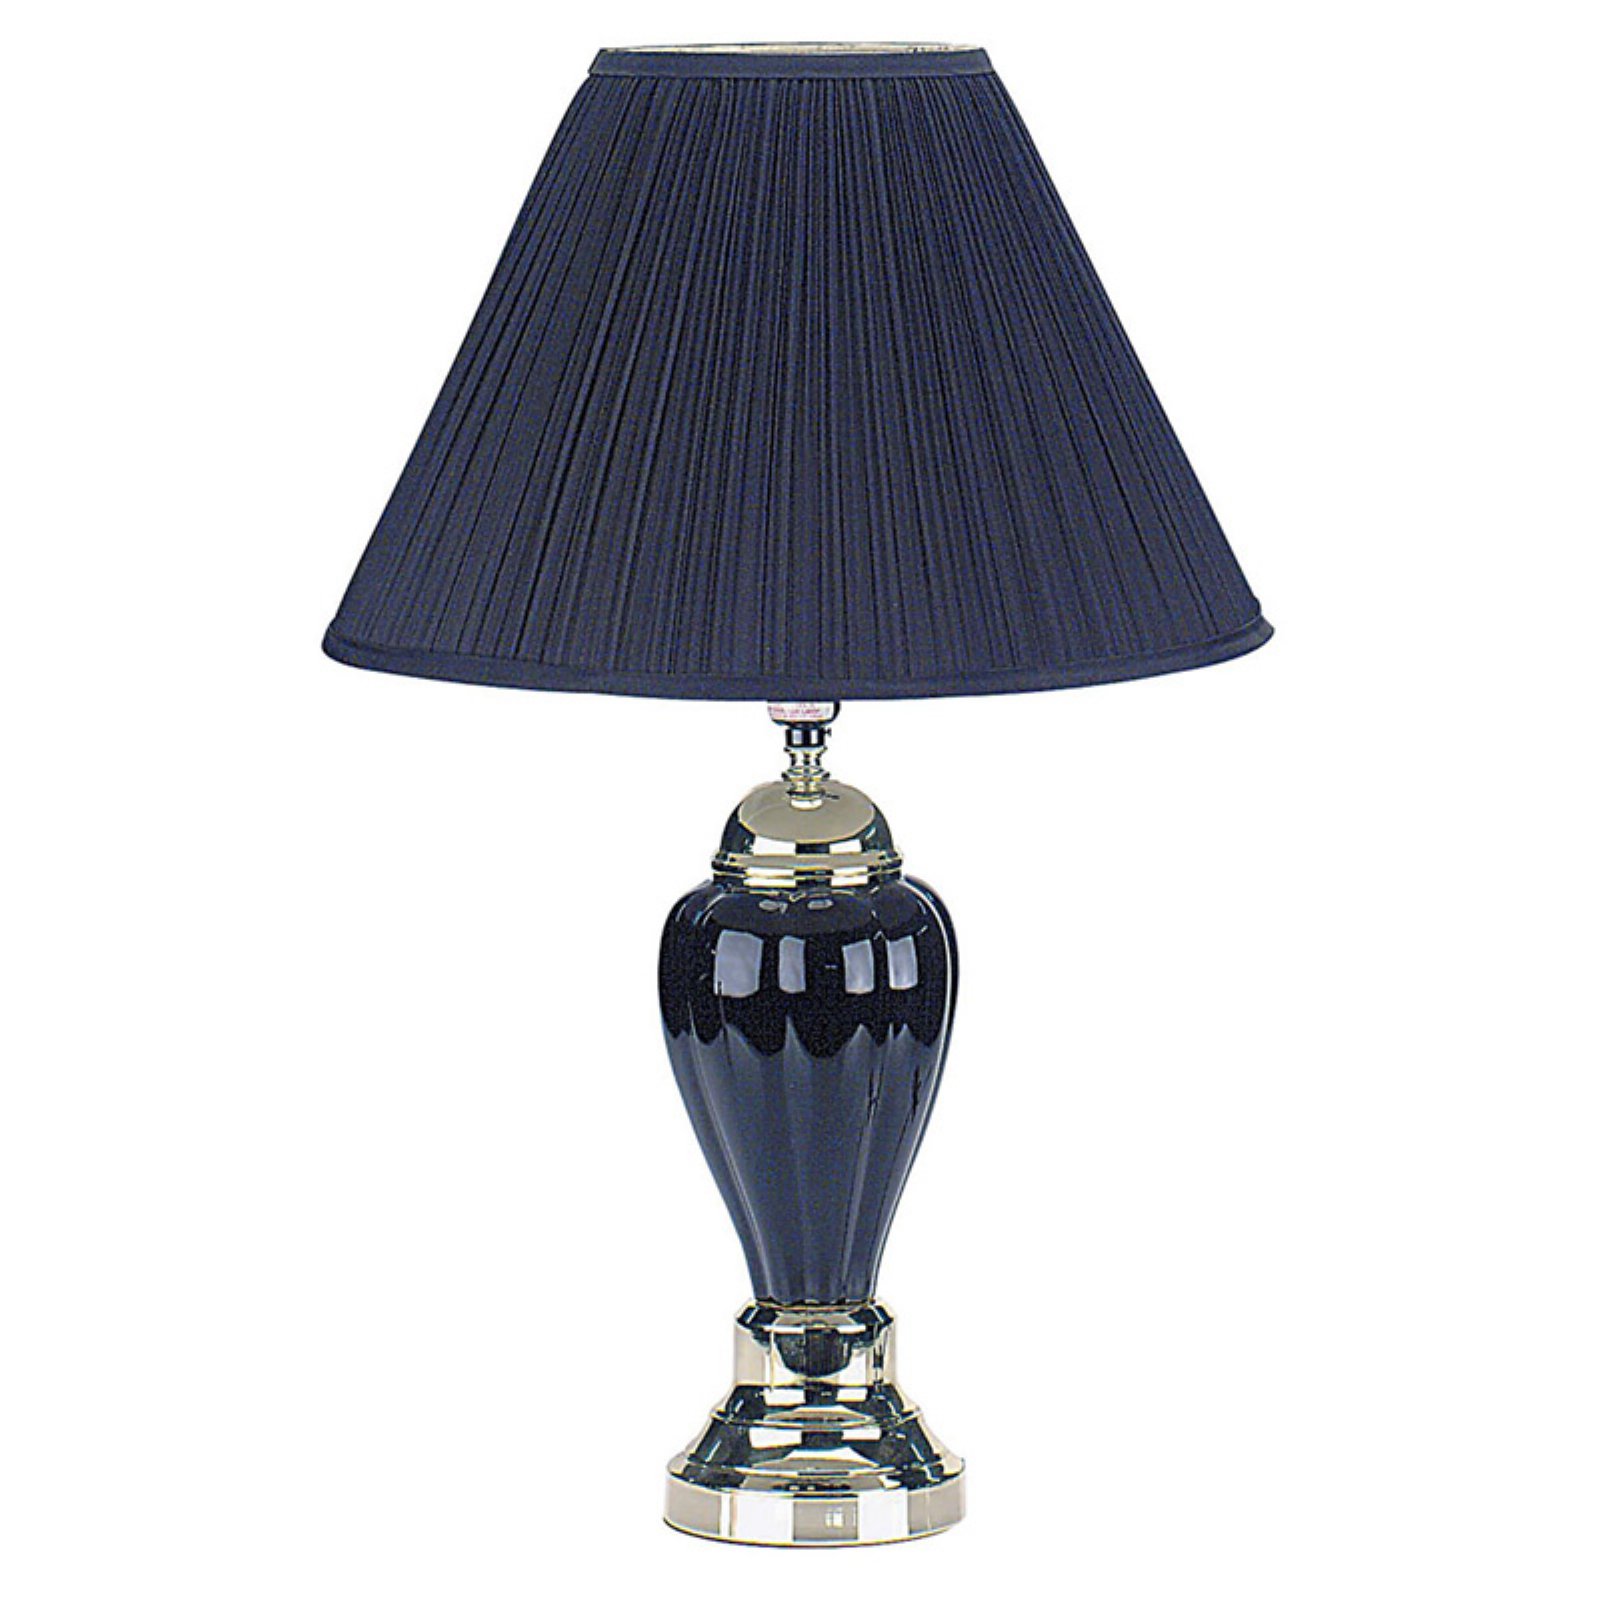 Silver/Ivory Ceramic Table Lamp, 27" - image 2 of 2